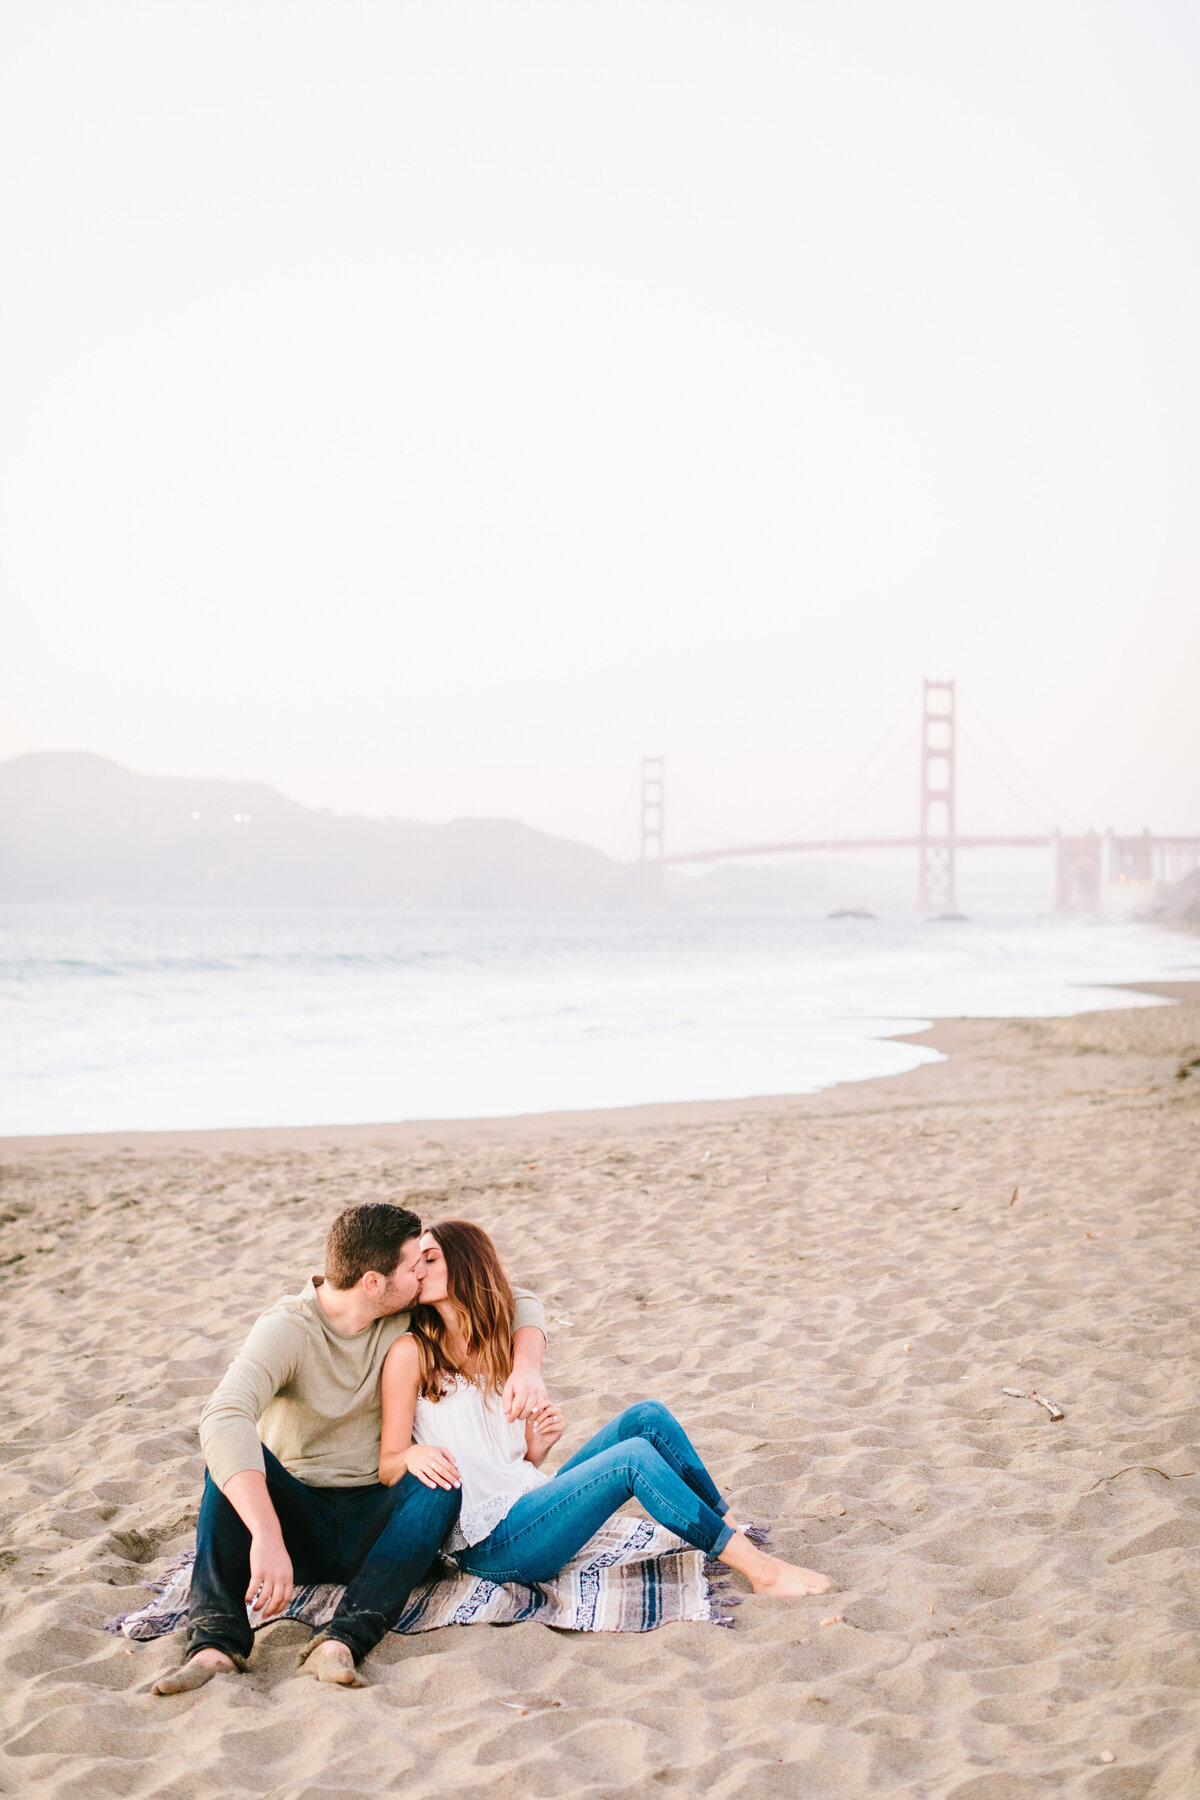 Best California and Texas Engagement Photos-Jodee Friday & Co-11